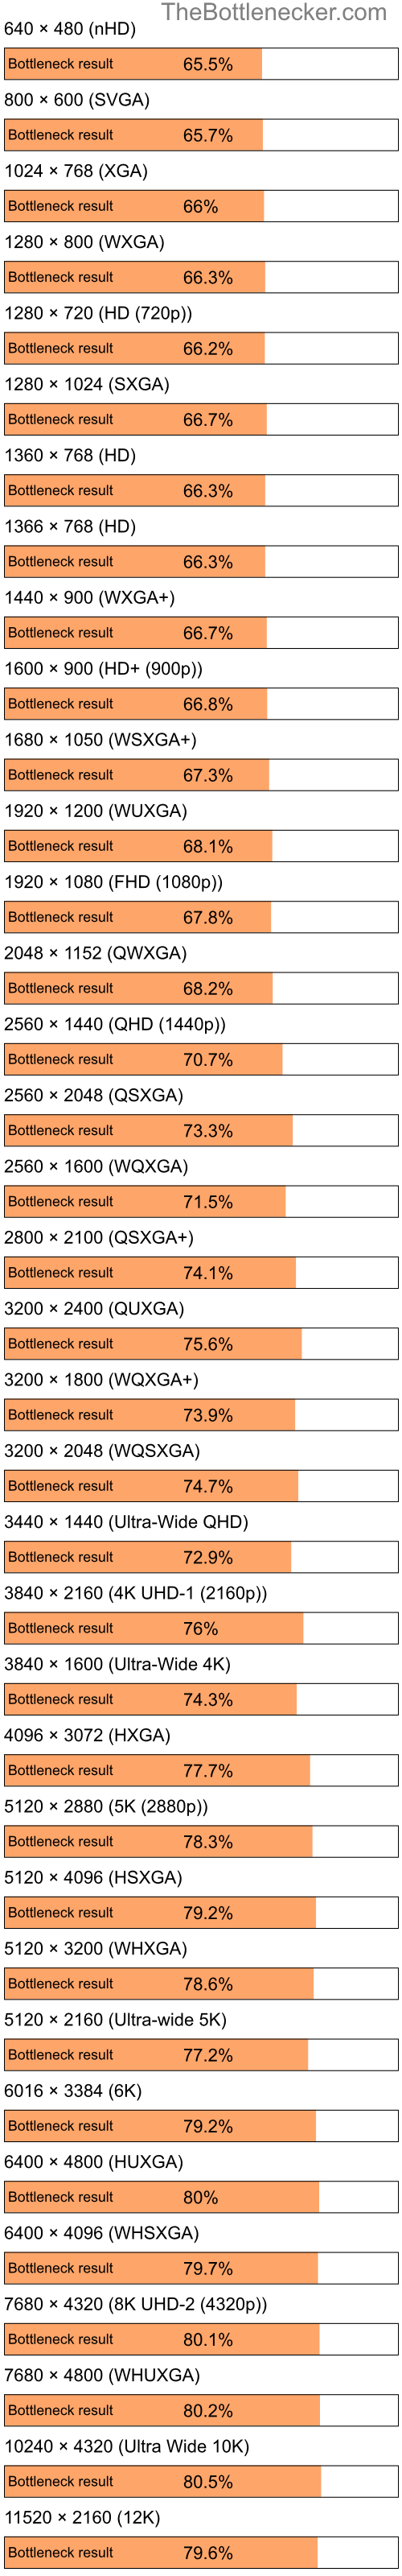 Bottleneck results by resolution for Intel Pentium 4 and AMD Radeon HD 6290 in Graphic Card Intense Tasks